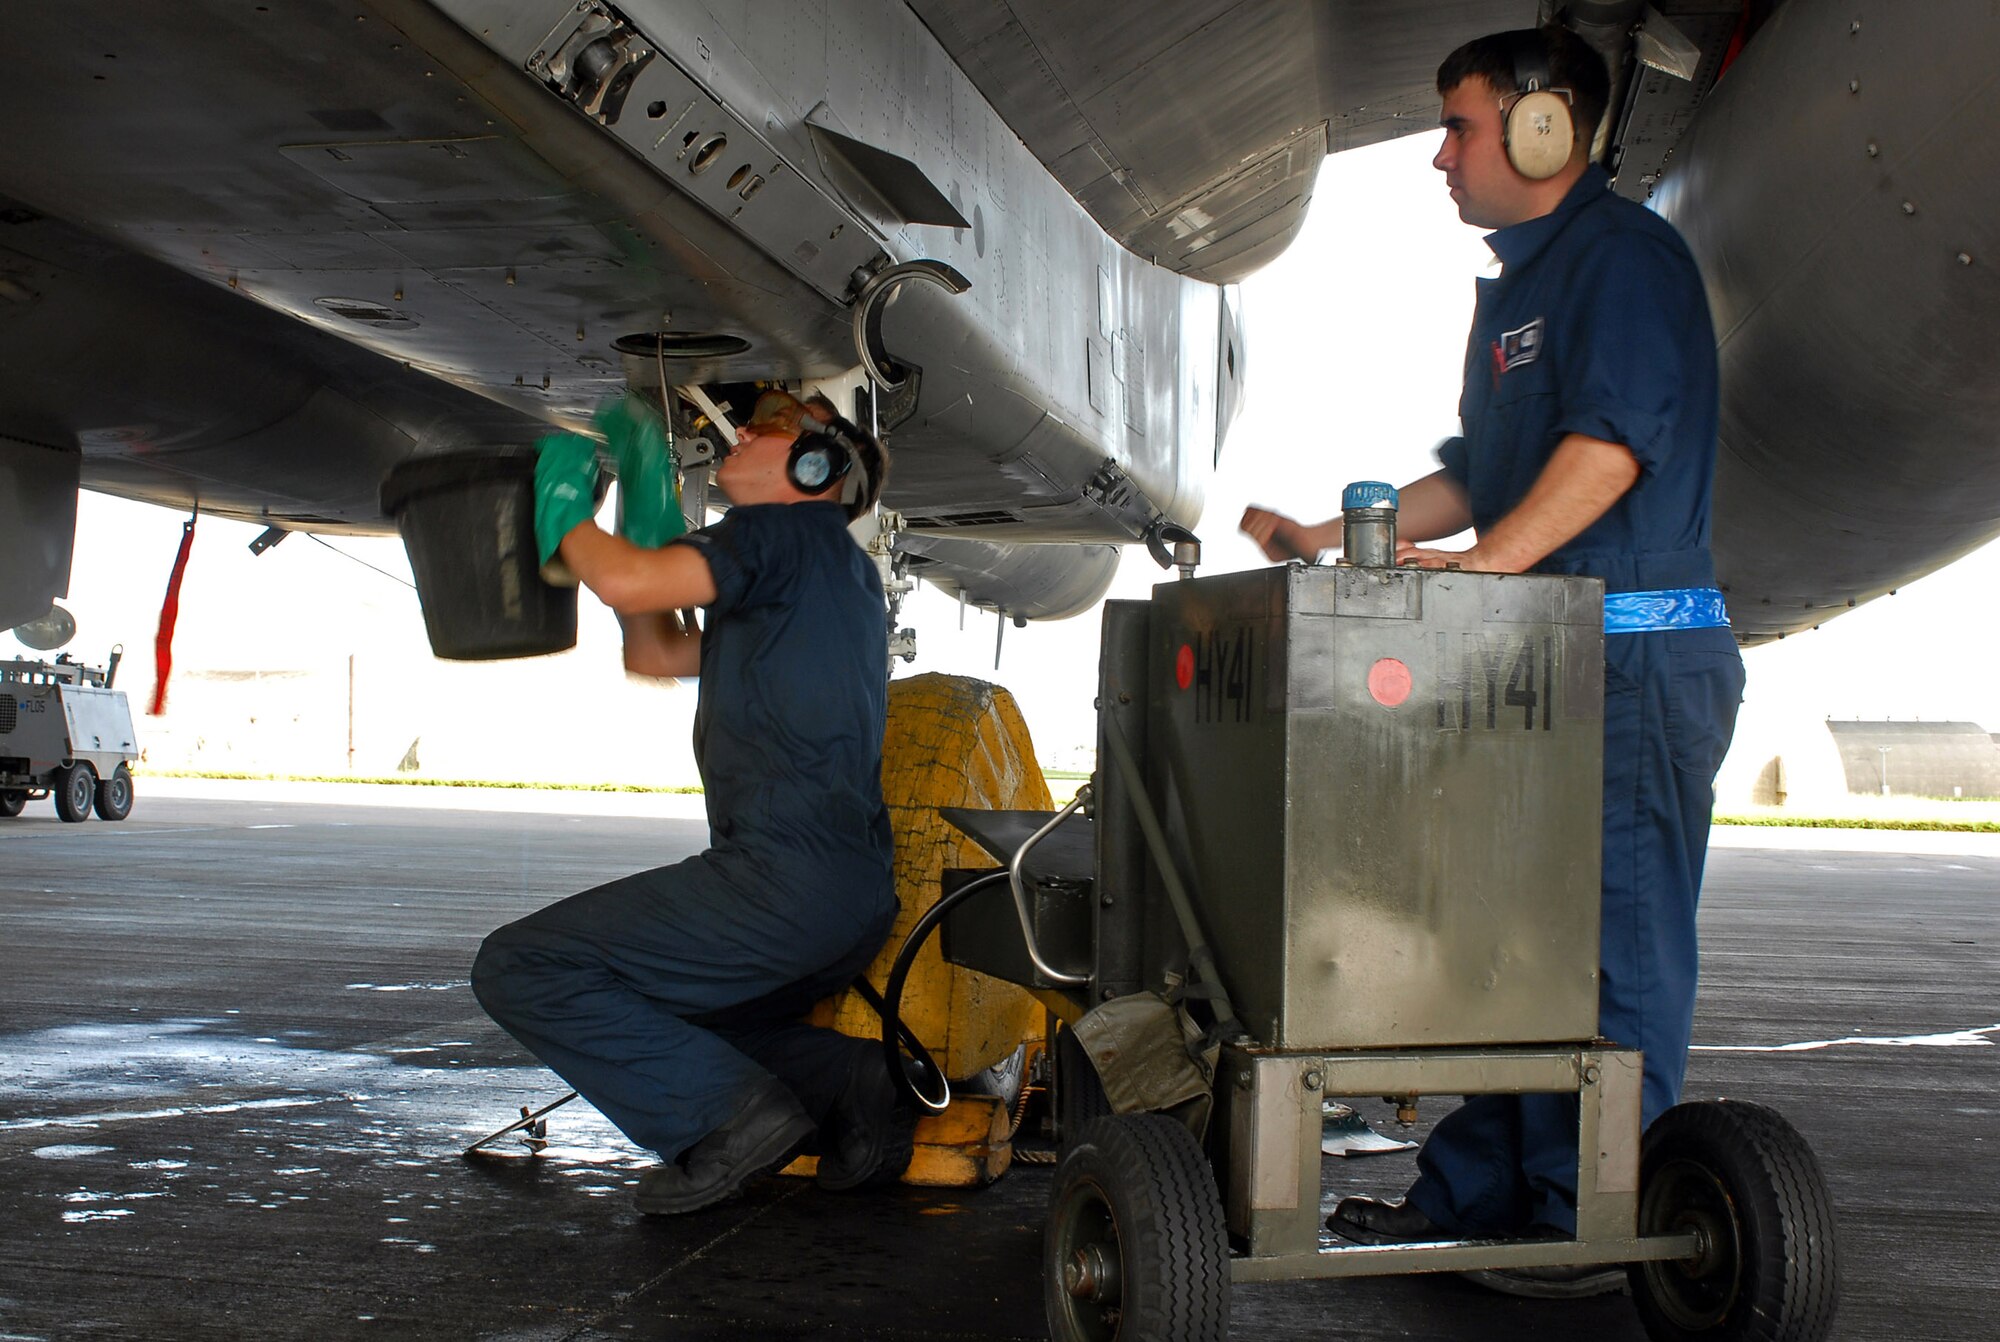 Airman 1st Class John Miller (left) and Airman David Tillich check the utilities systems of an F-15 in preparation for aircraft departure to Guam in support of Exercise Valiant Shield Eagle Aug. 5 at Kadena Air Base, Japan. Air Force leaders are considering realigning aircraft maintenance units directly into flying squadrons. (U.S. Air Force photo/Airman 1st Class Kelly Timney)